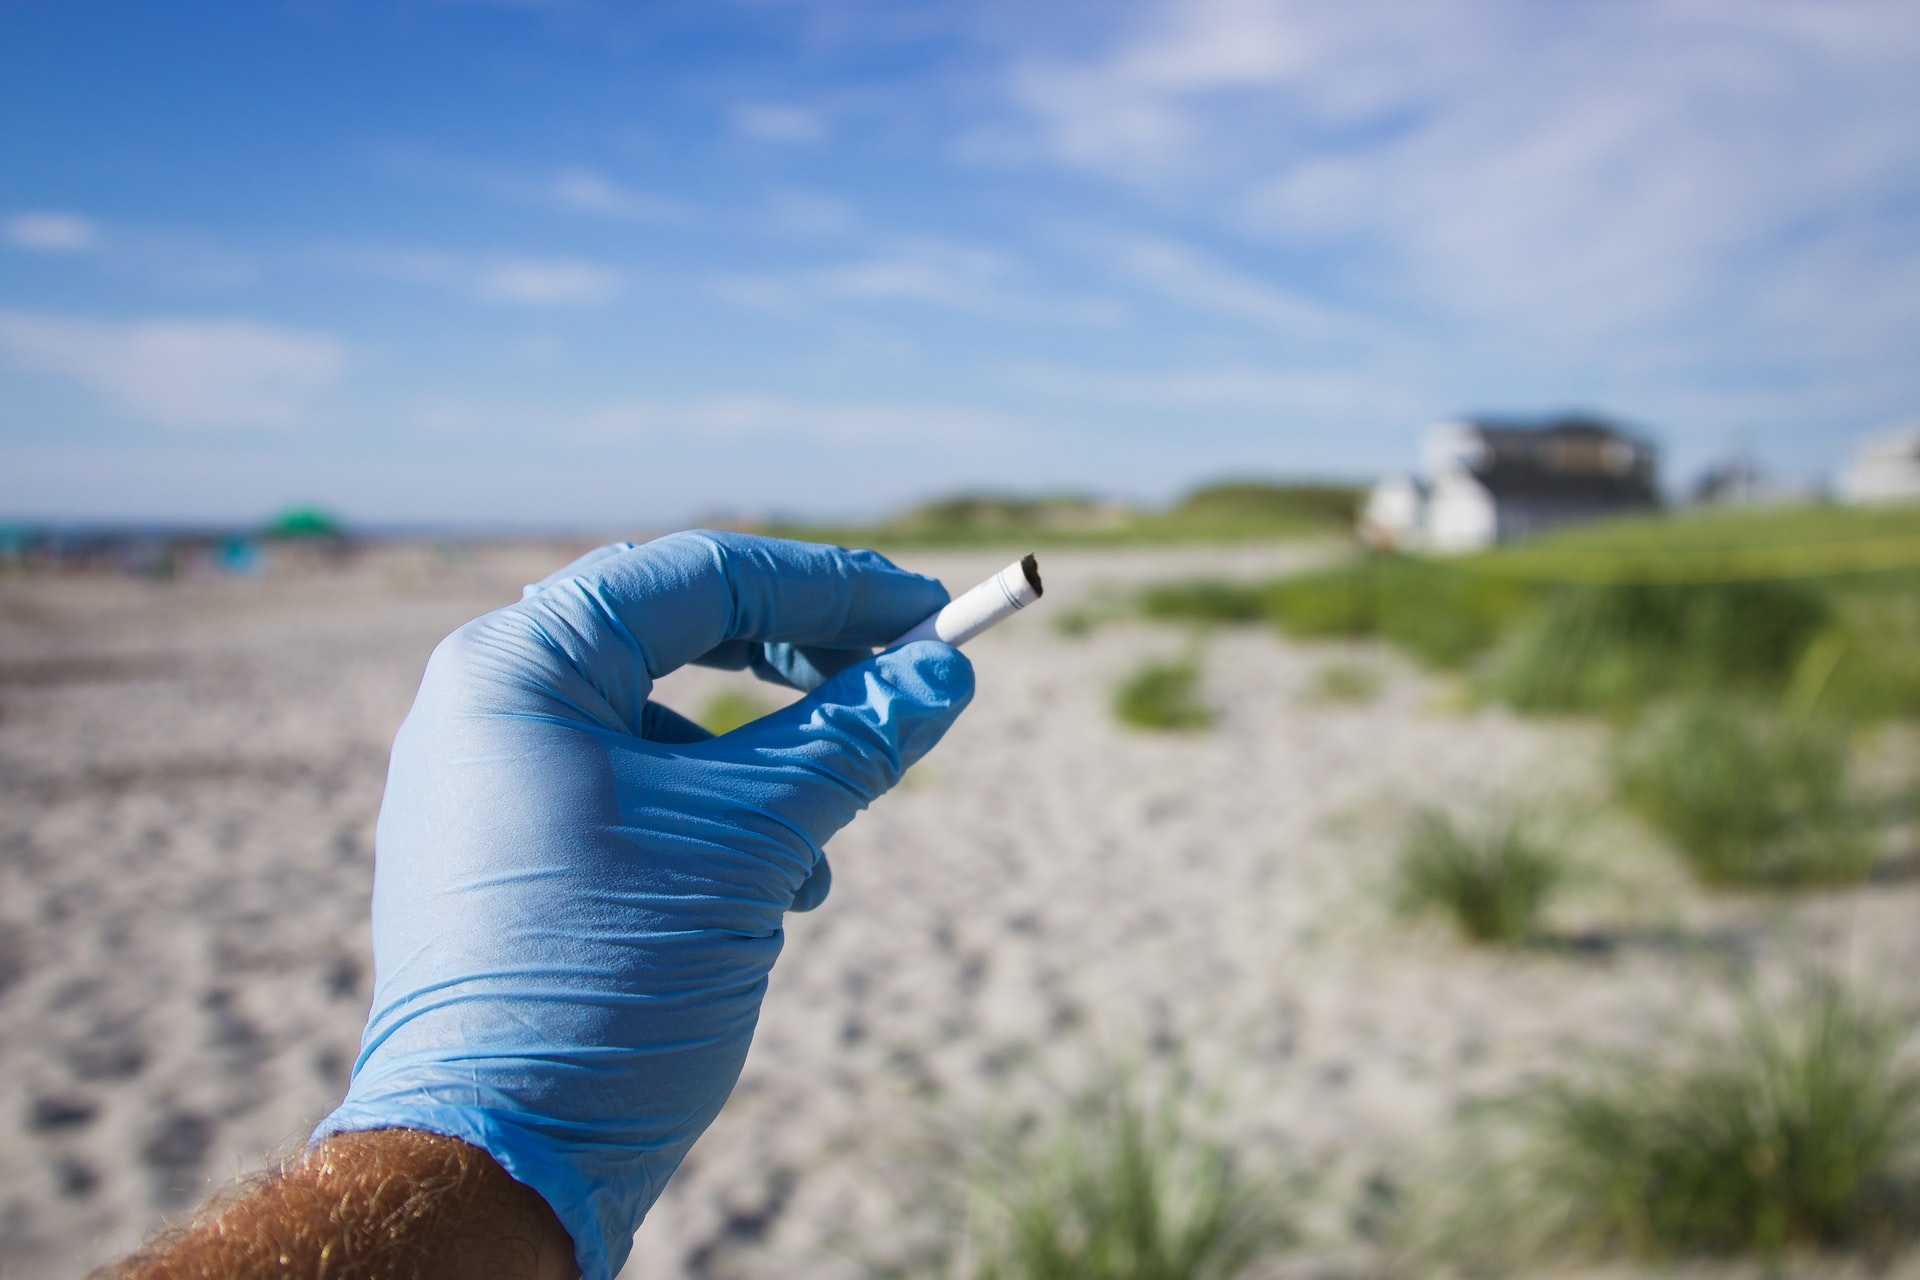 These tiny toxic butts also cause significant harm to our water sources. It is not uncommon for field researchers to find cigarette butts inside dead sea birds, sea turtles, fish and dolphins.